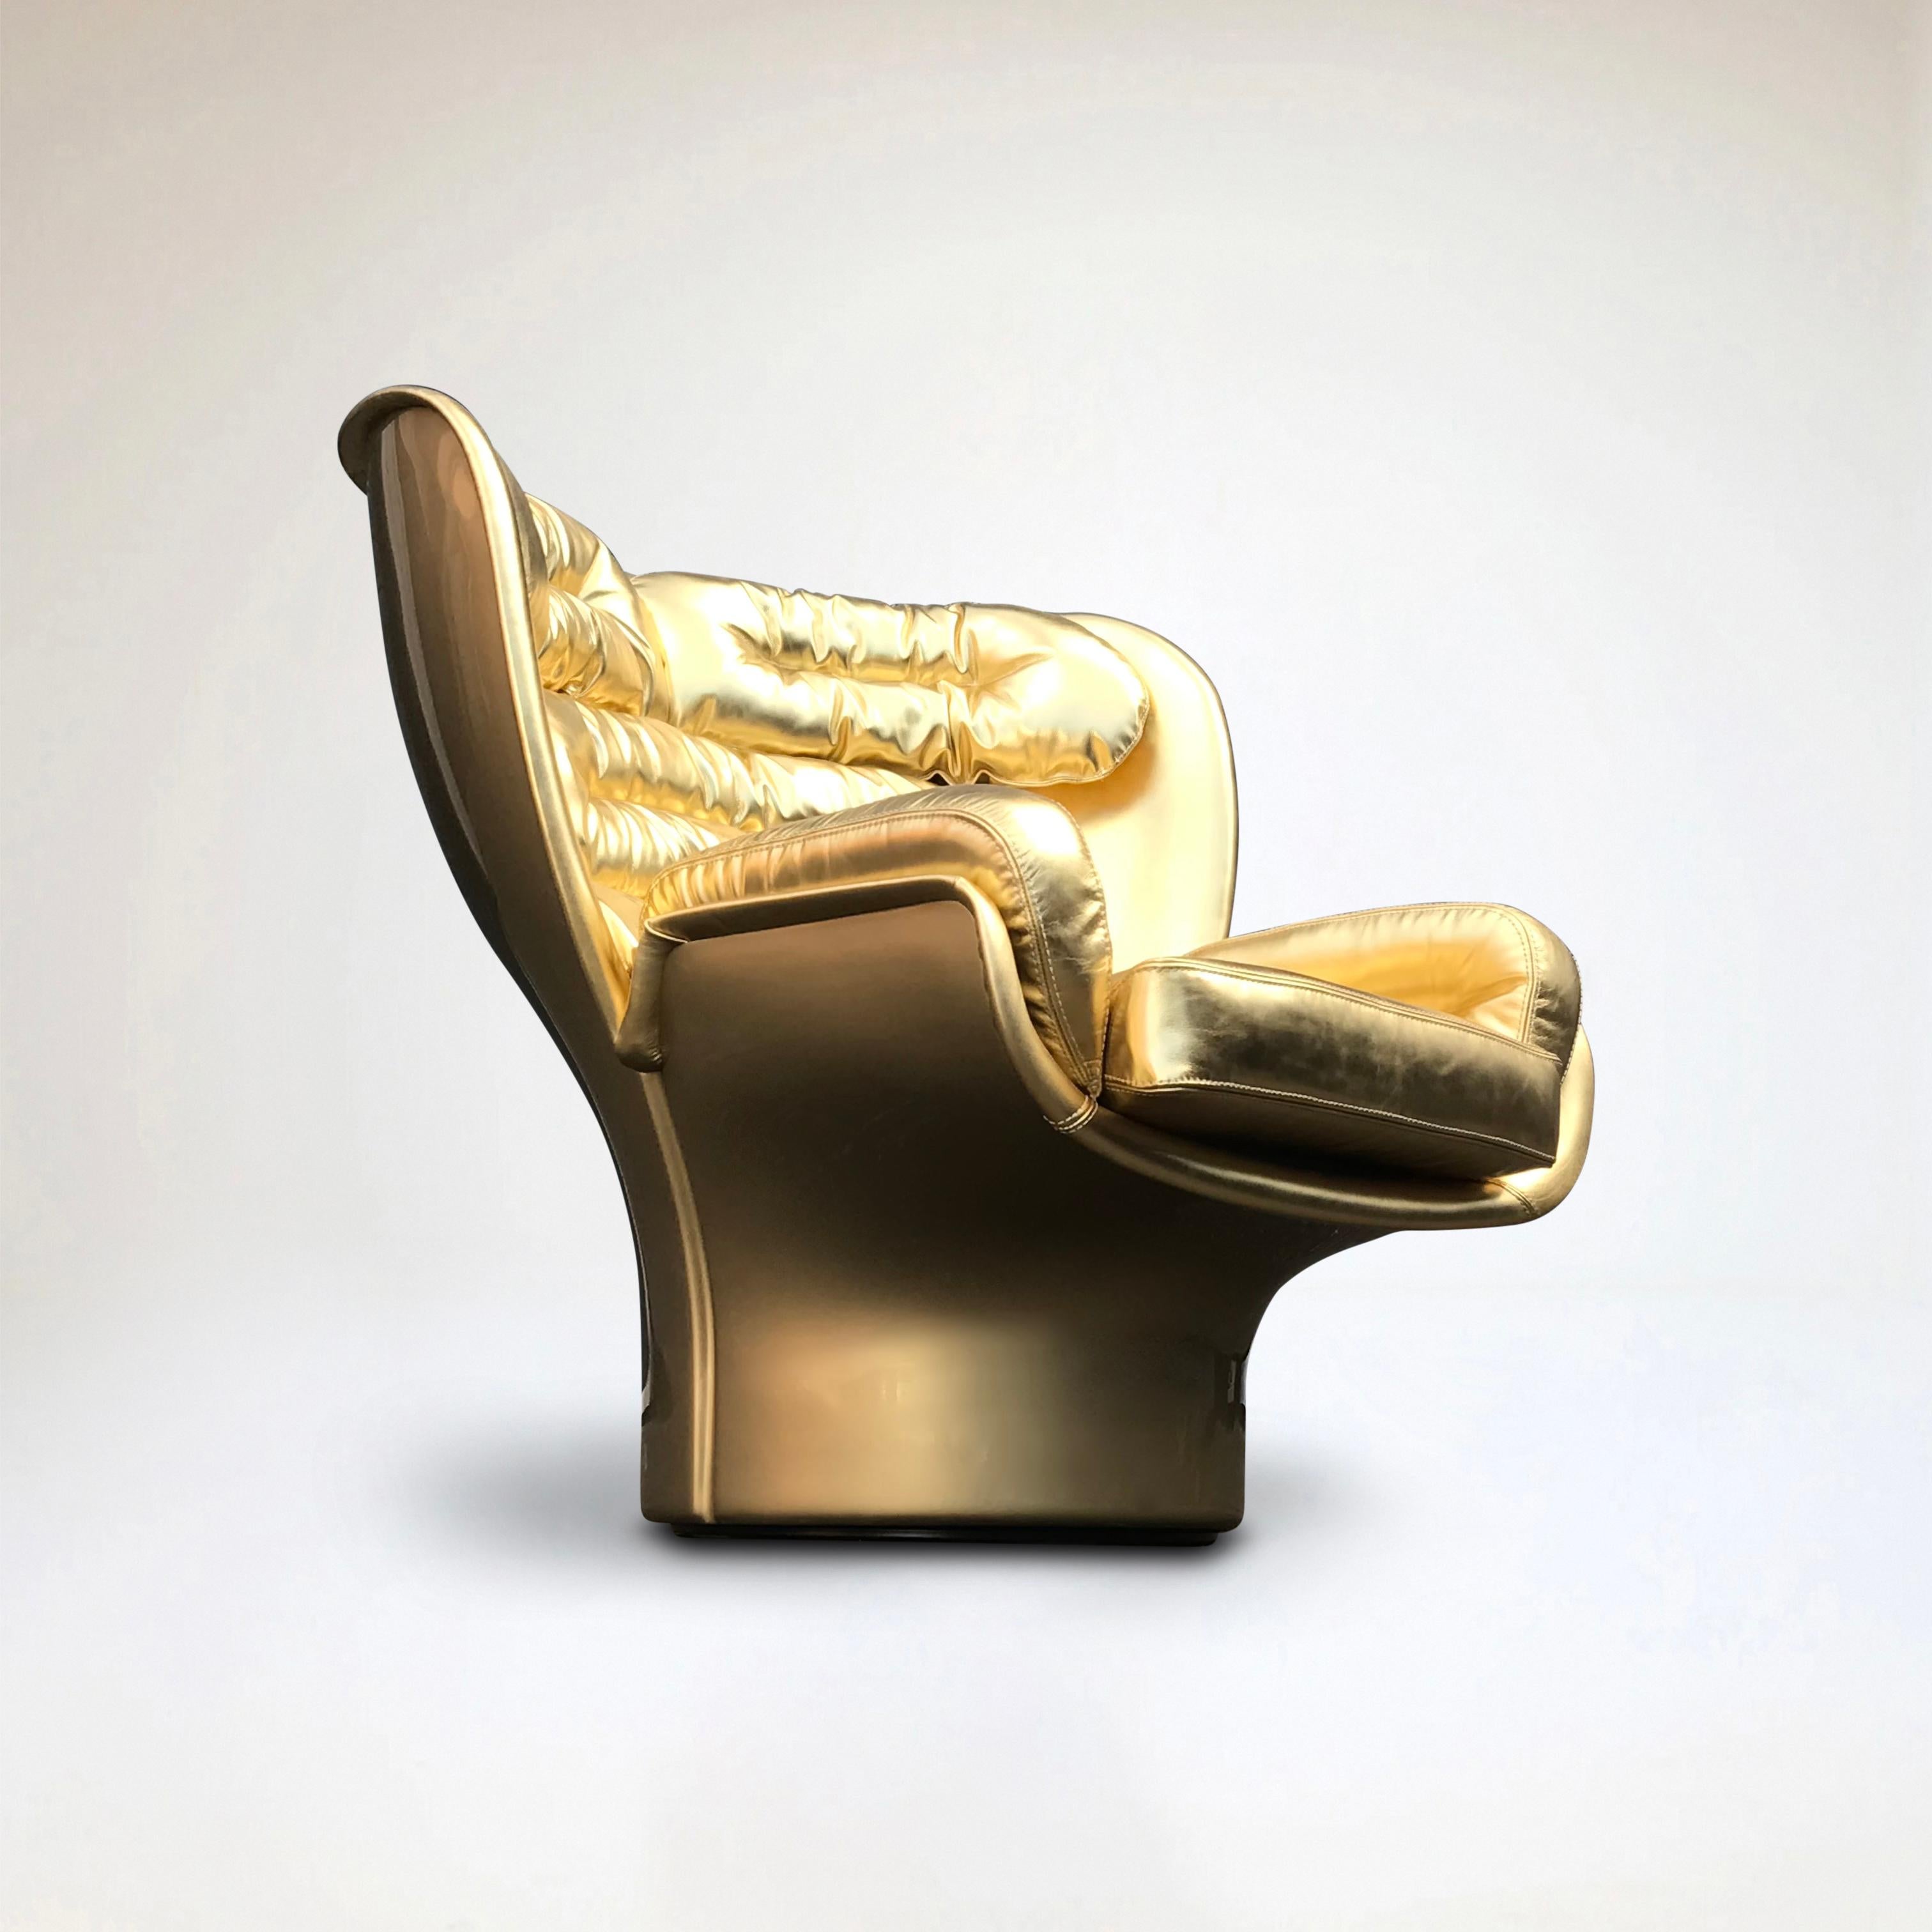 Golden Limited Edition Elda Chair by Joe Colombo for Longhi Italy no. 7/20 For Sale 3